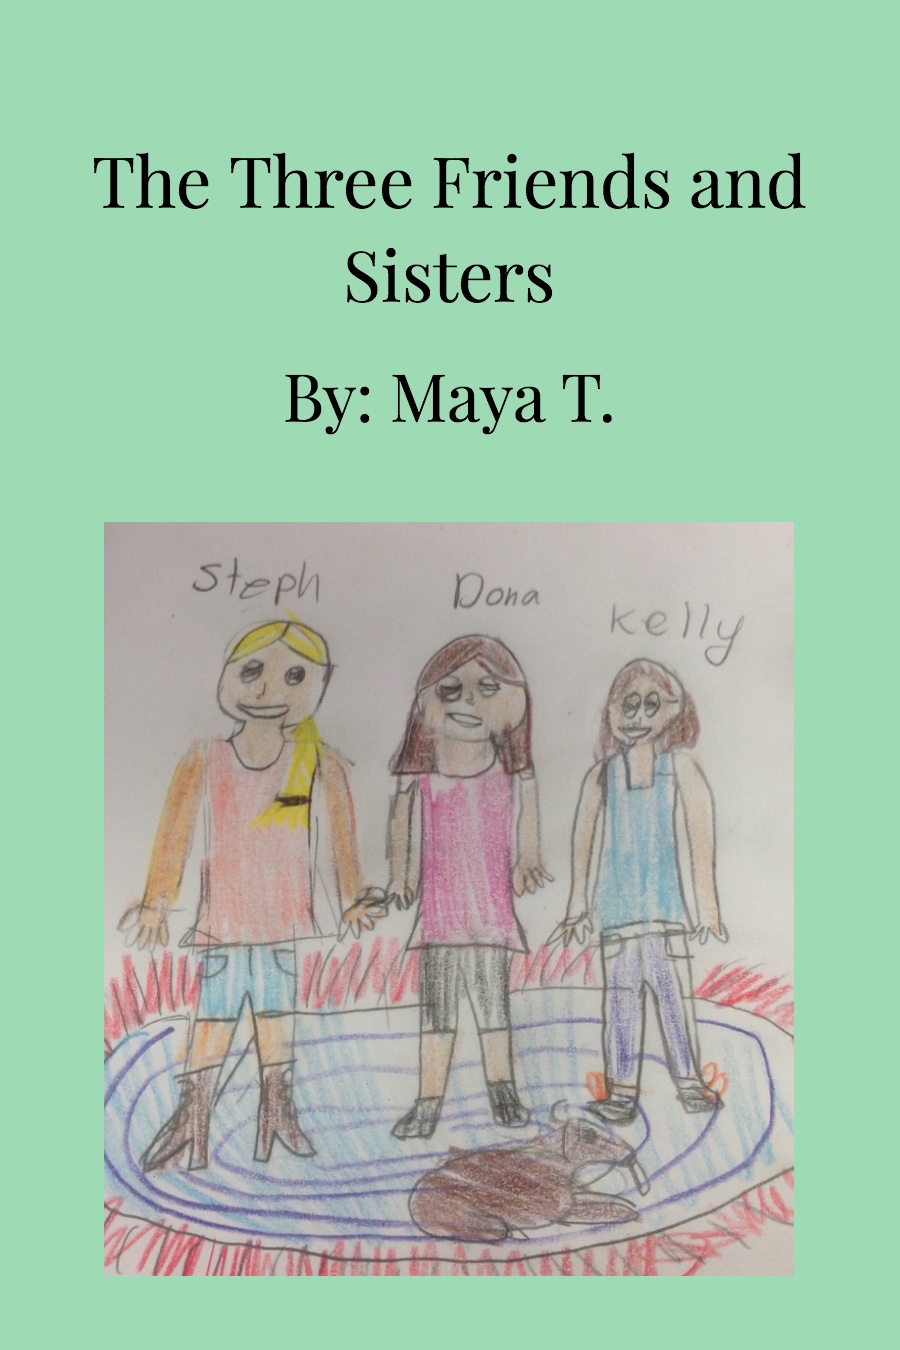 Three Friends and Sisters by Maya T